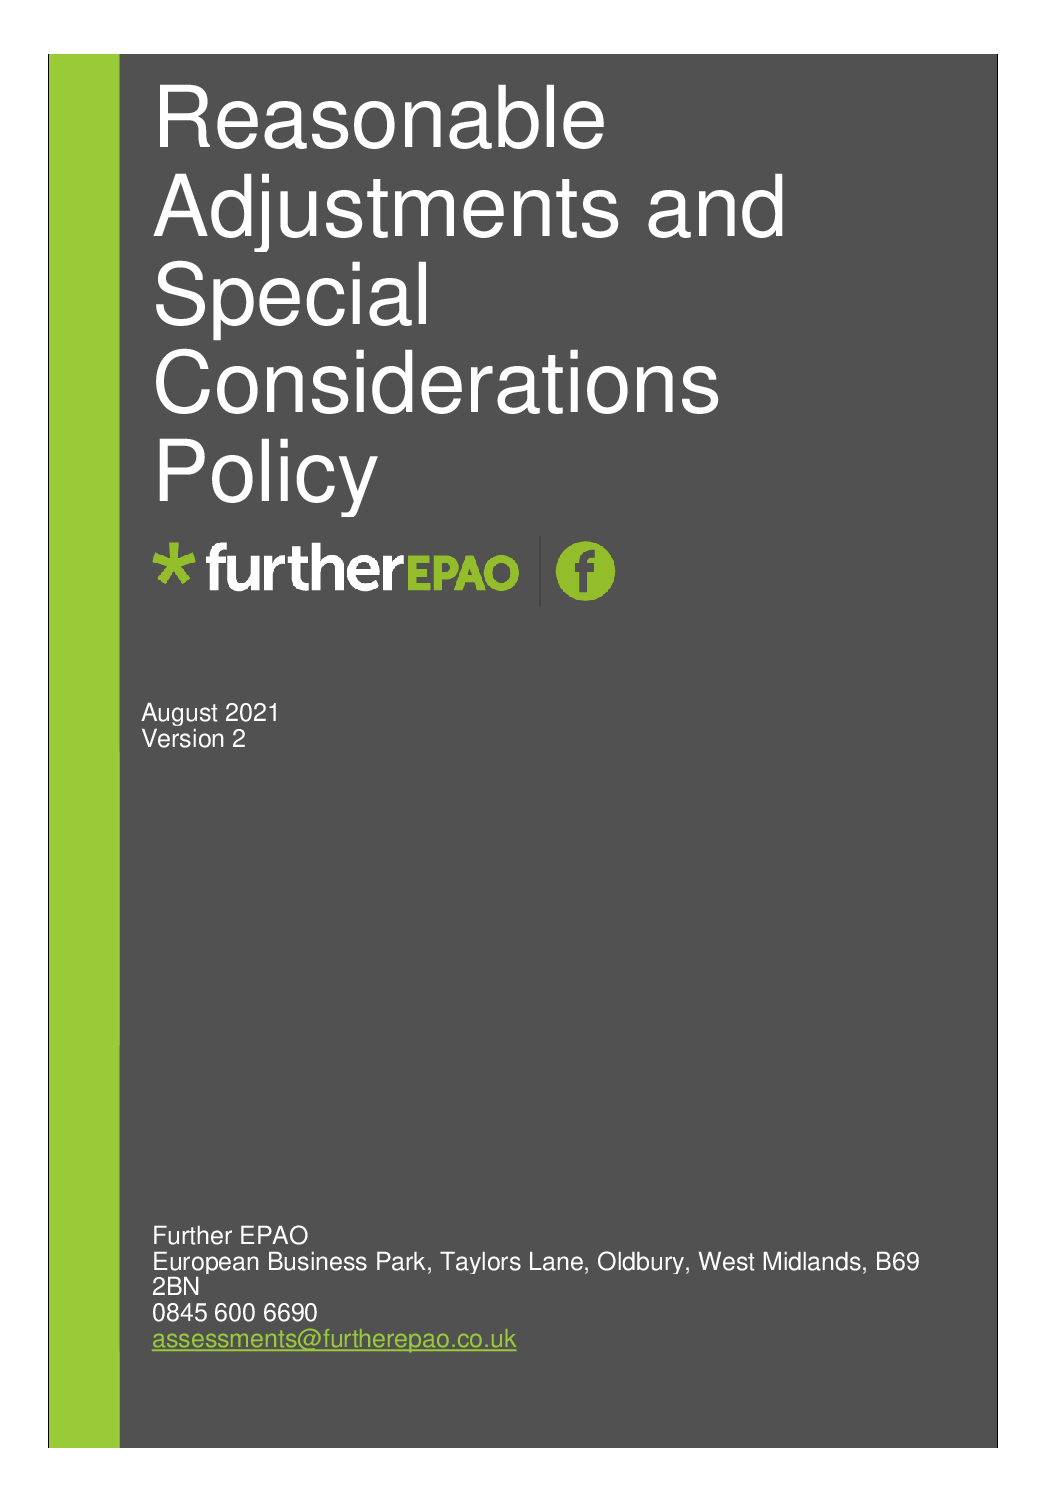 Reasonable-adjustments-and-special-considerations-policy-V2-August-2021-pdf.jpg